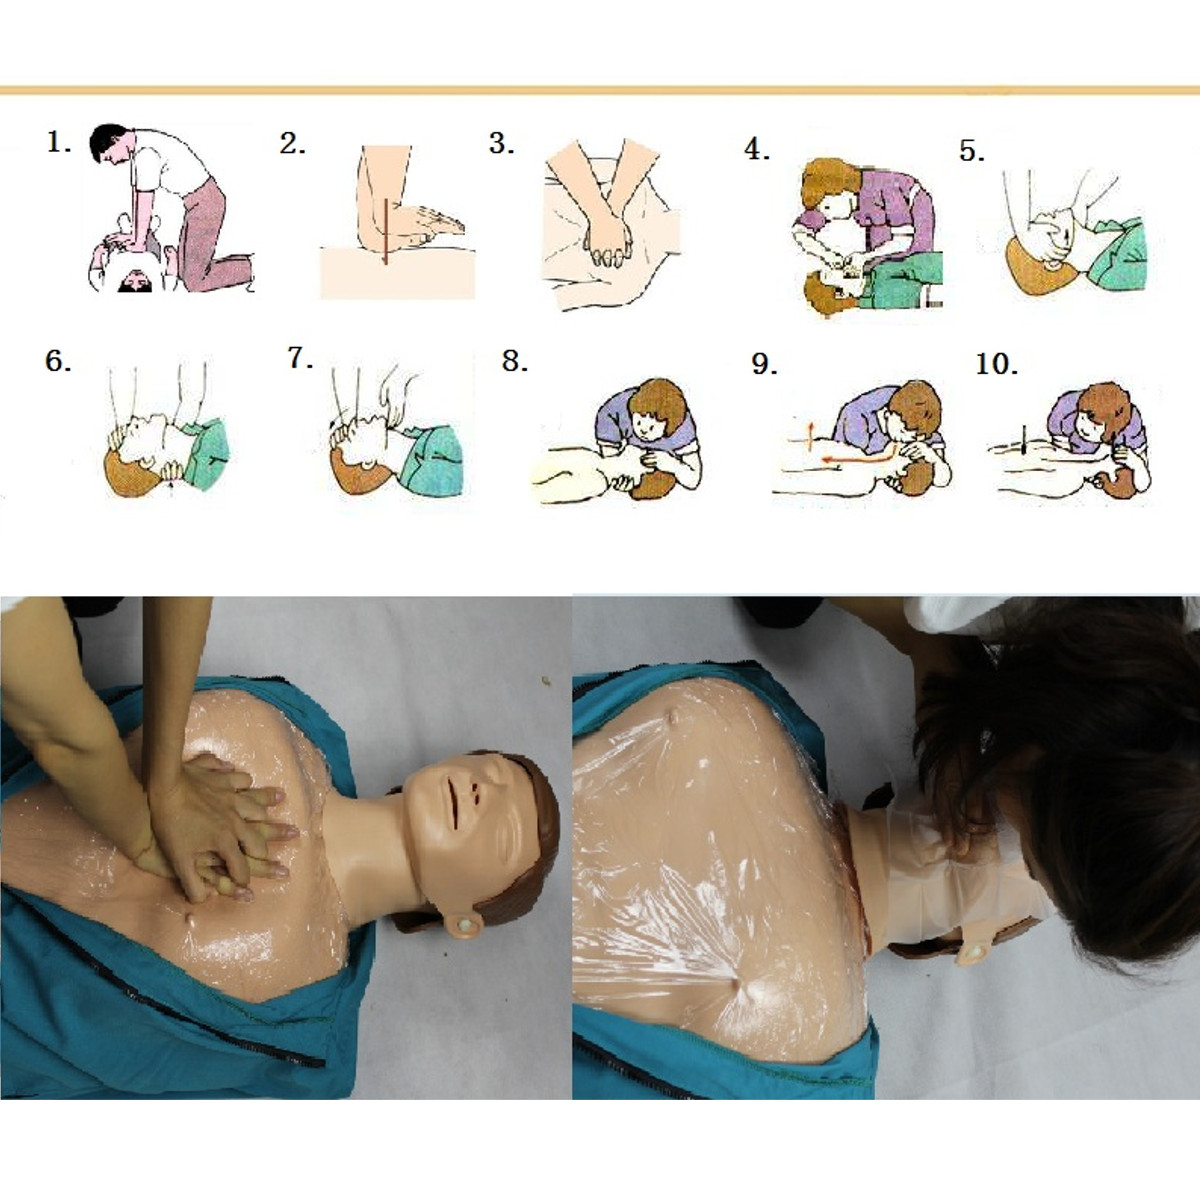 CPR-Adult-Manikin-AED-First-Aid-Training-Dummy-Training-Medical-Model-Respiration-Human-1545480-8